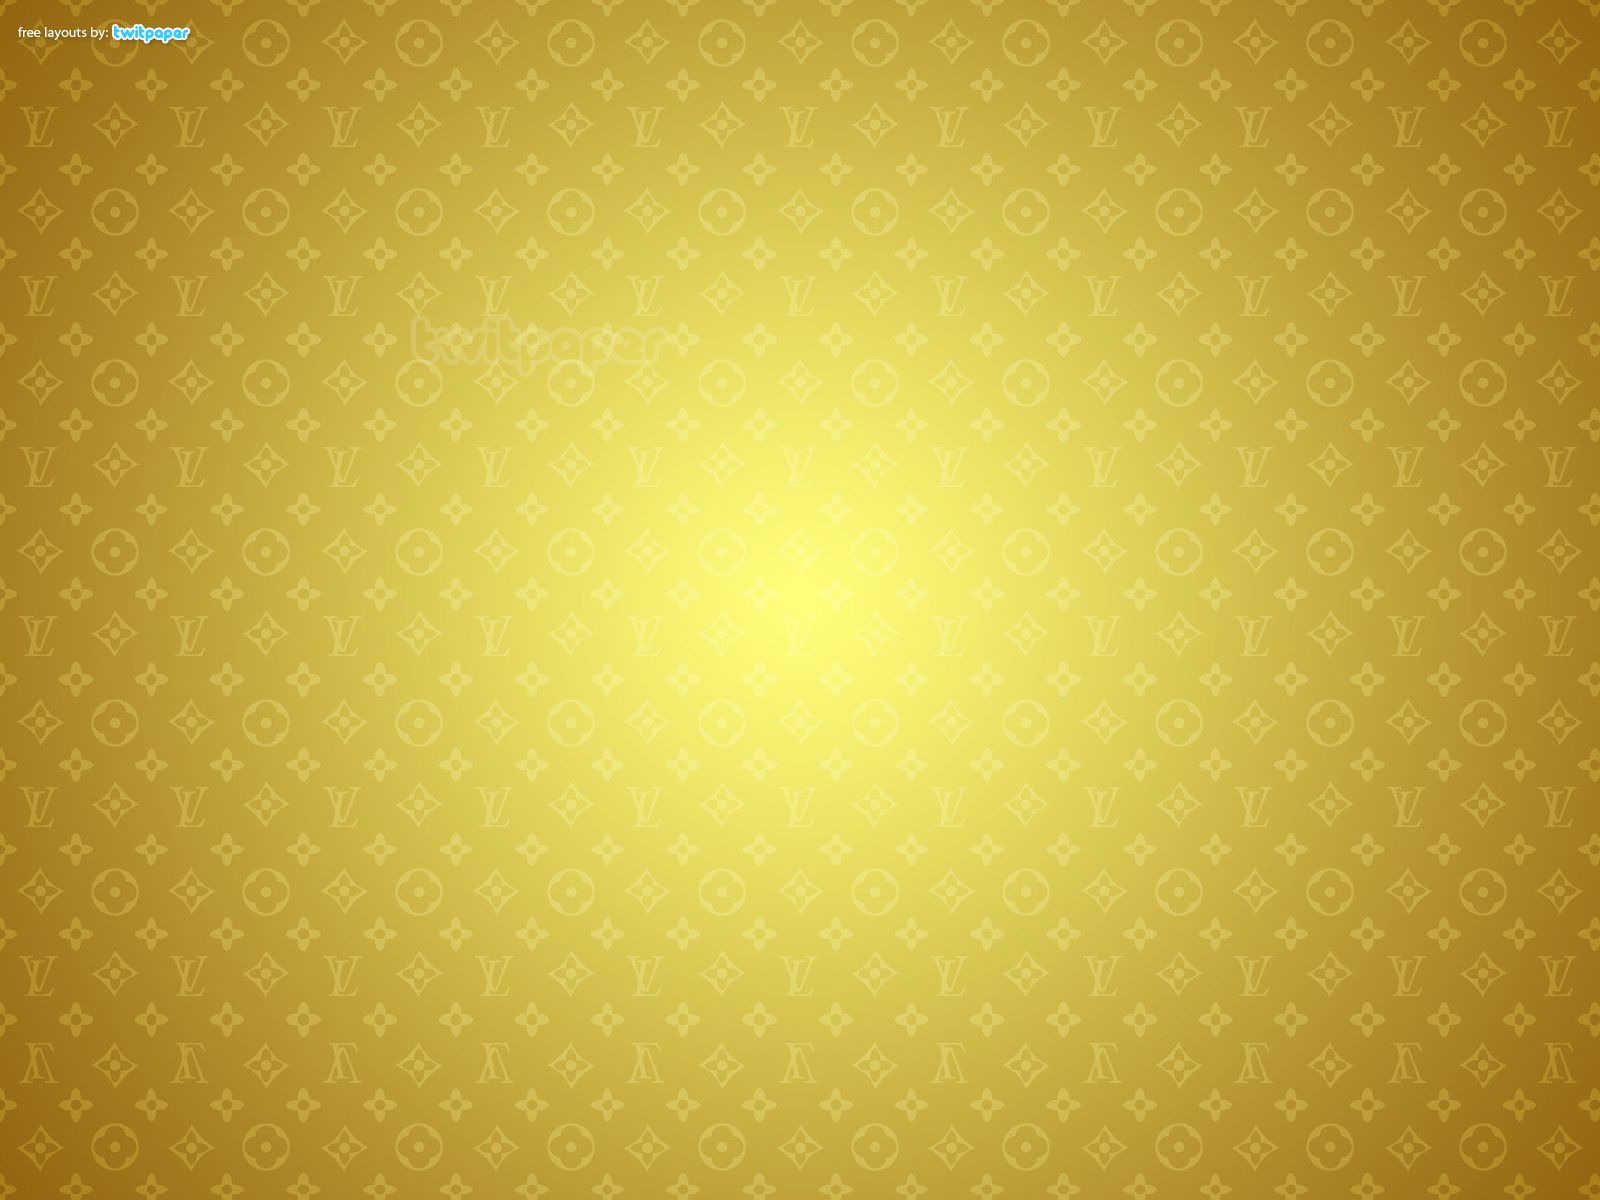 Golden Wallpaper Awesome